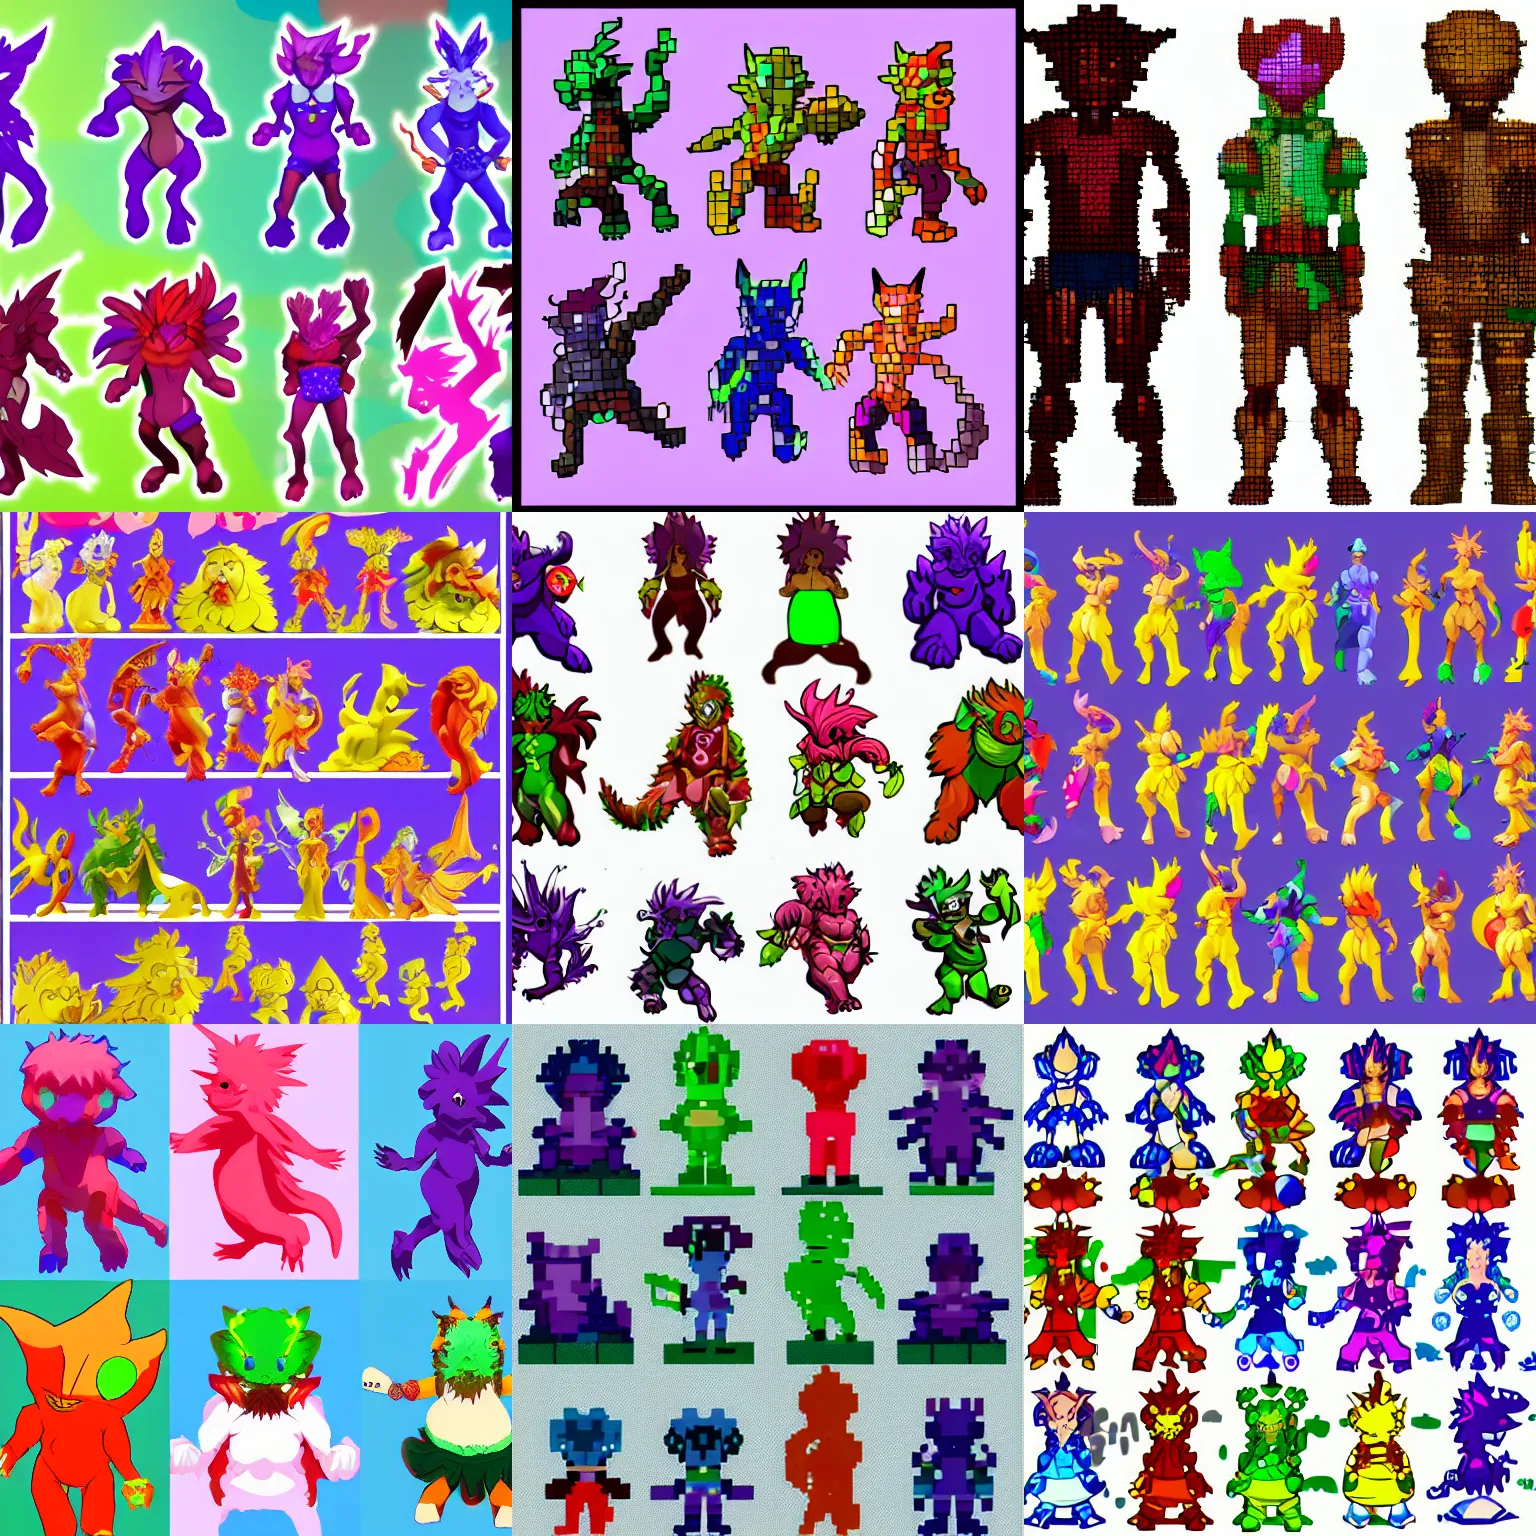 sprite sheet of colourful anima figures | Stable Diffusion | OpenArt